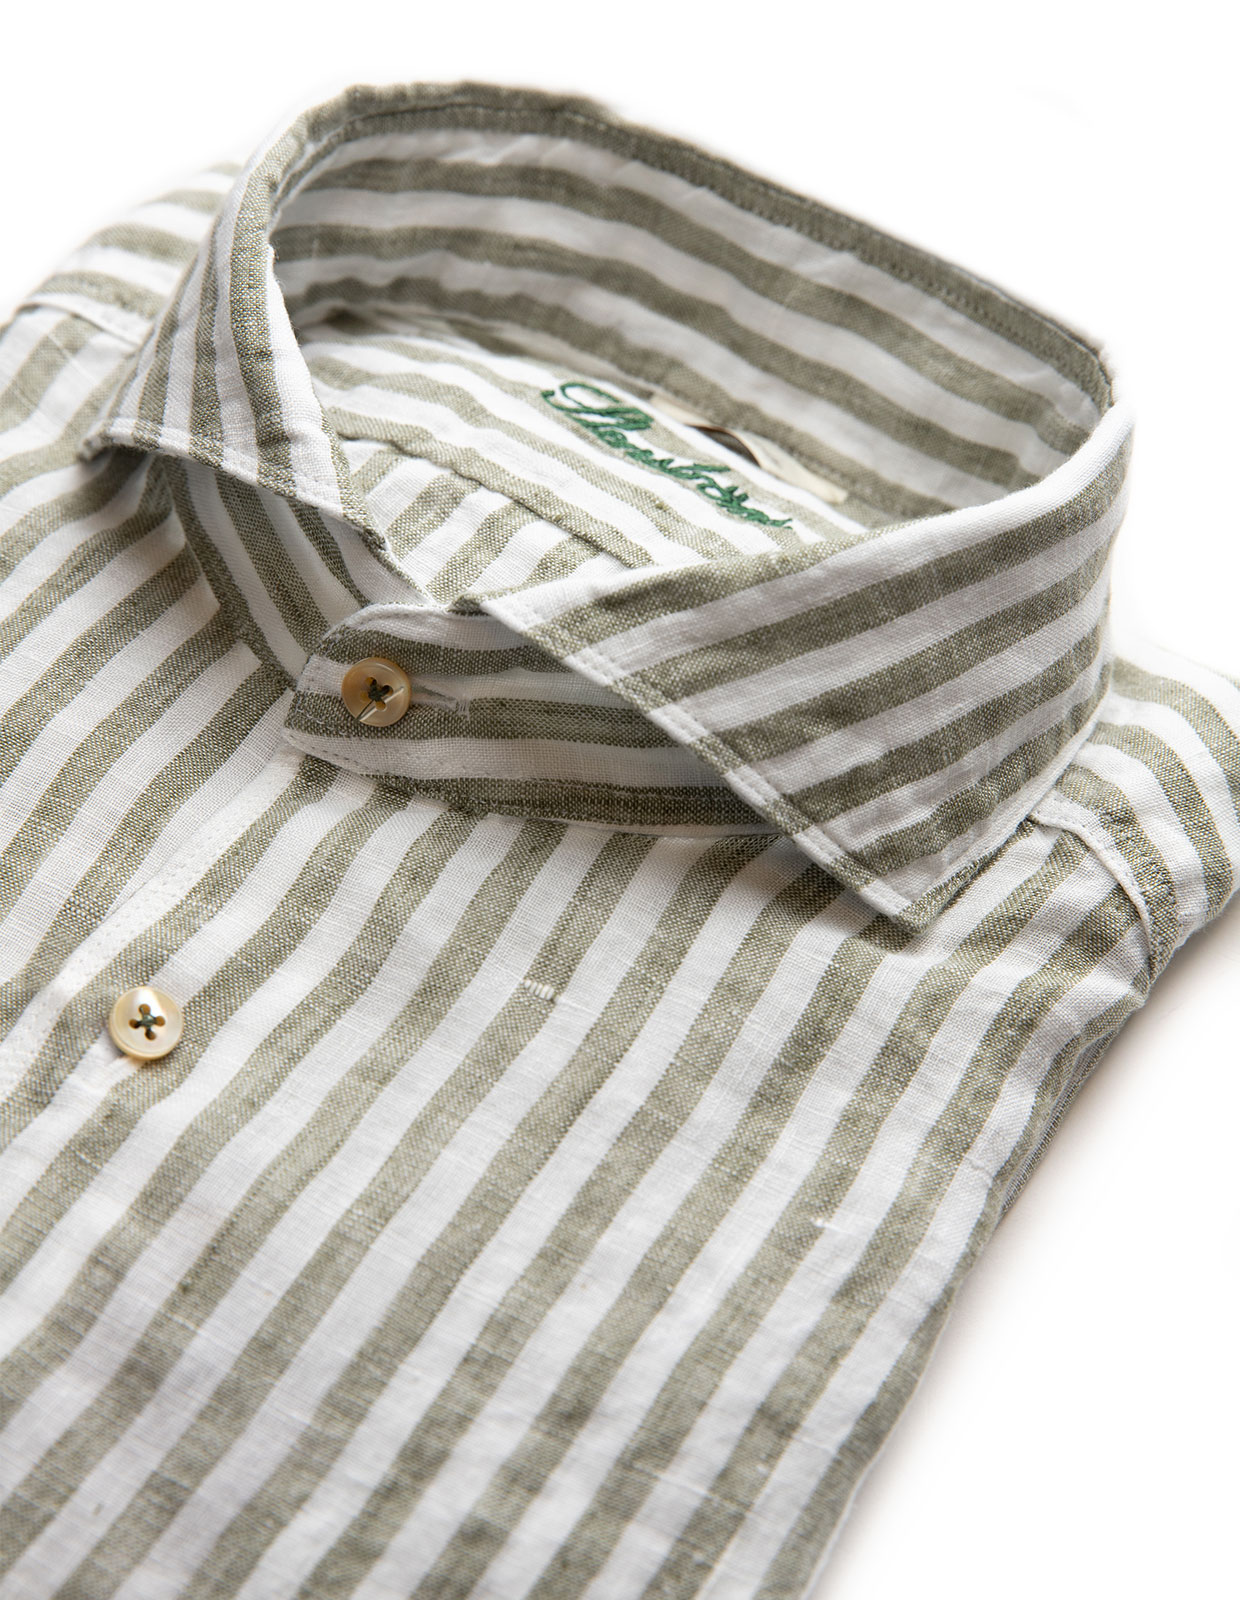 Fitted Body Shirt Striped Linen Sage/White